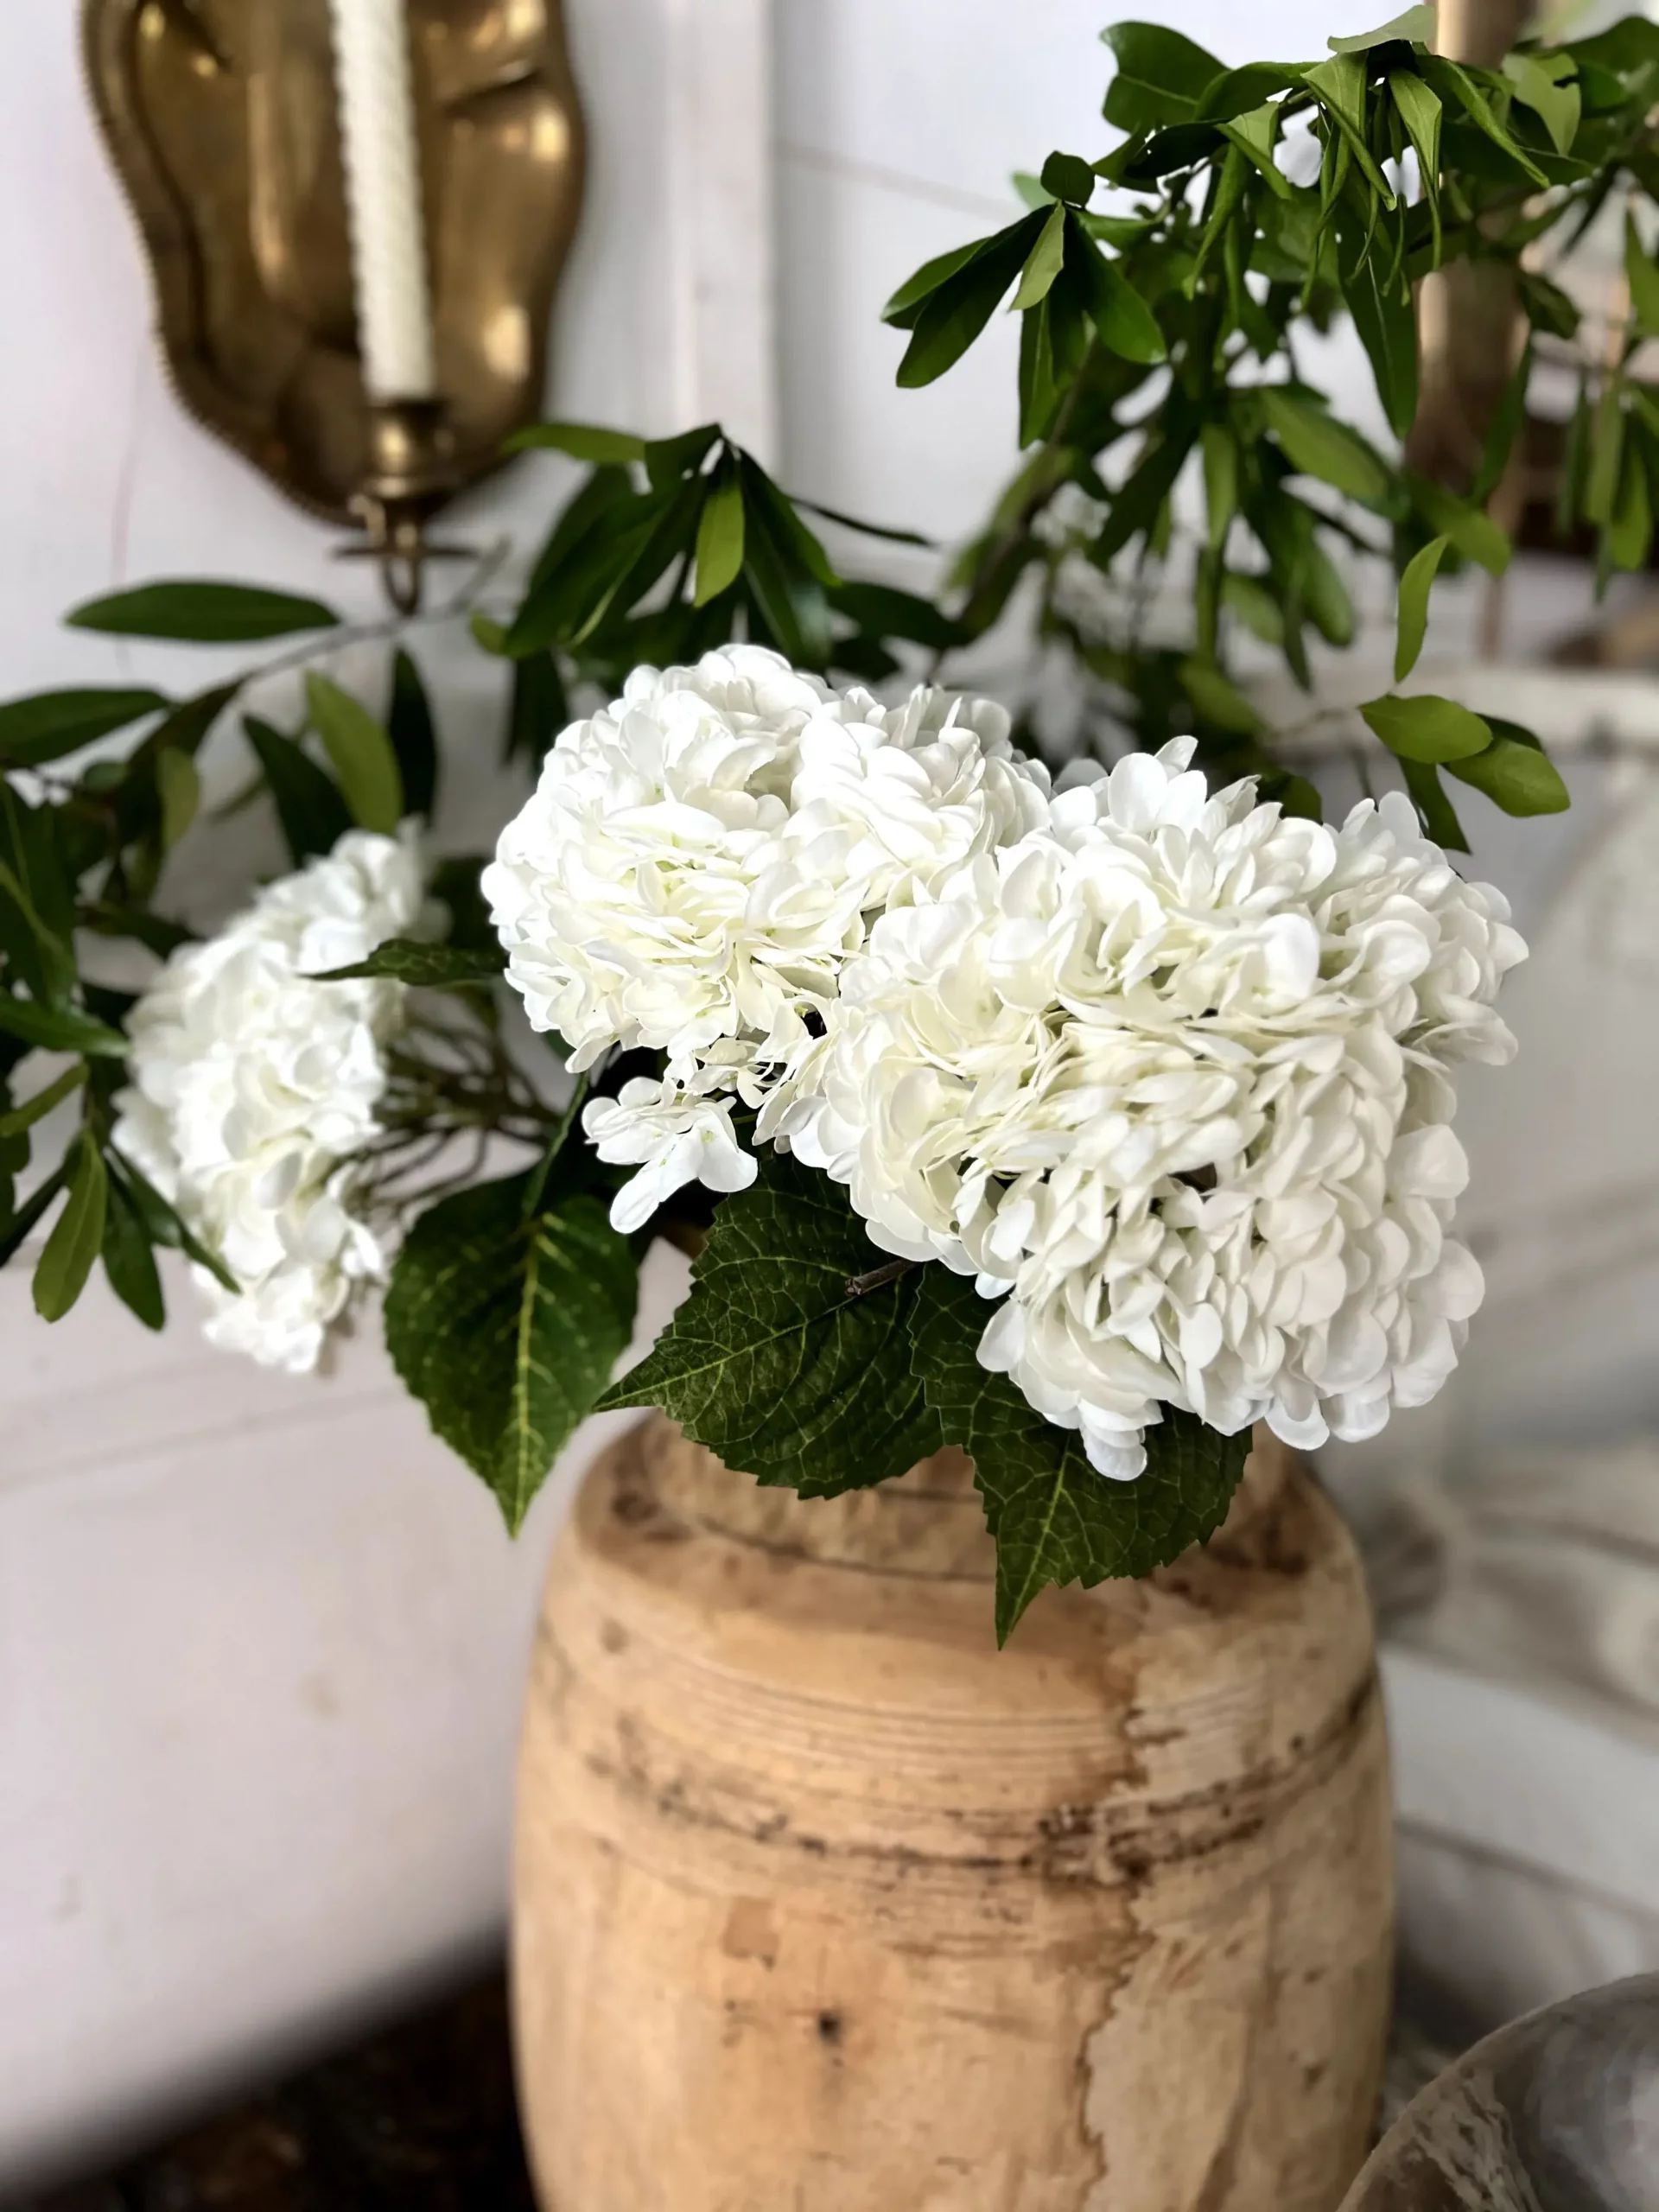 hydrangeas in a wooden vase with faux greenery